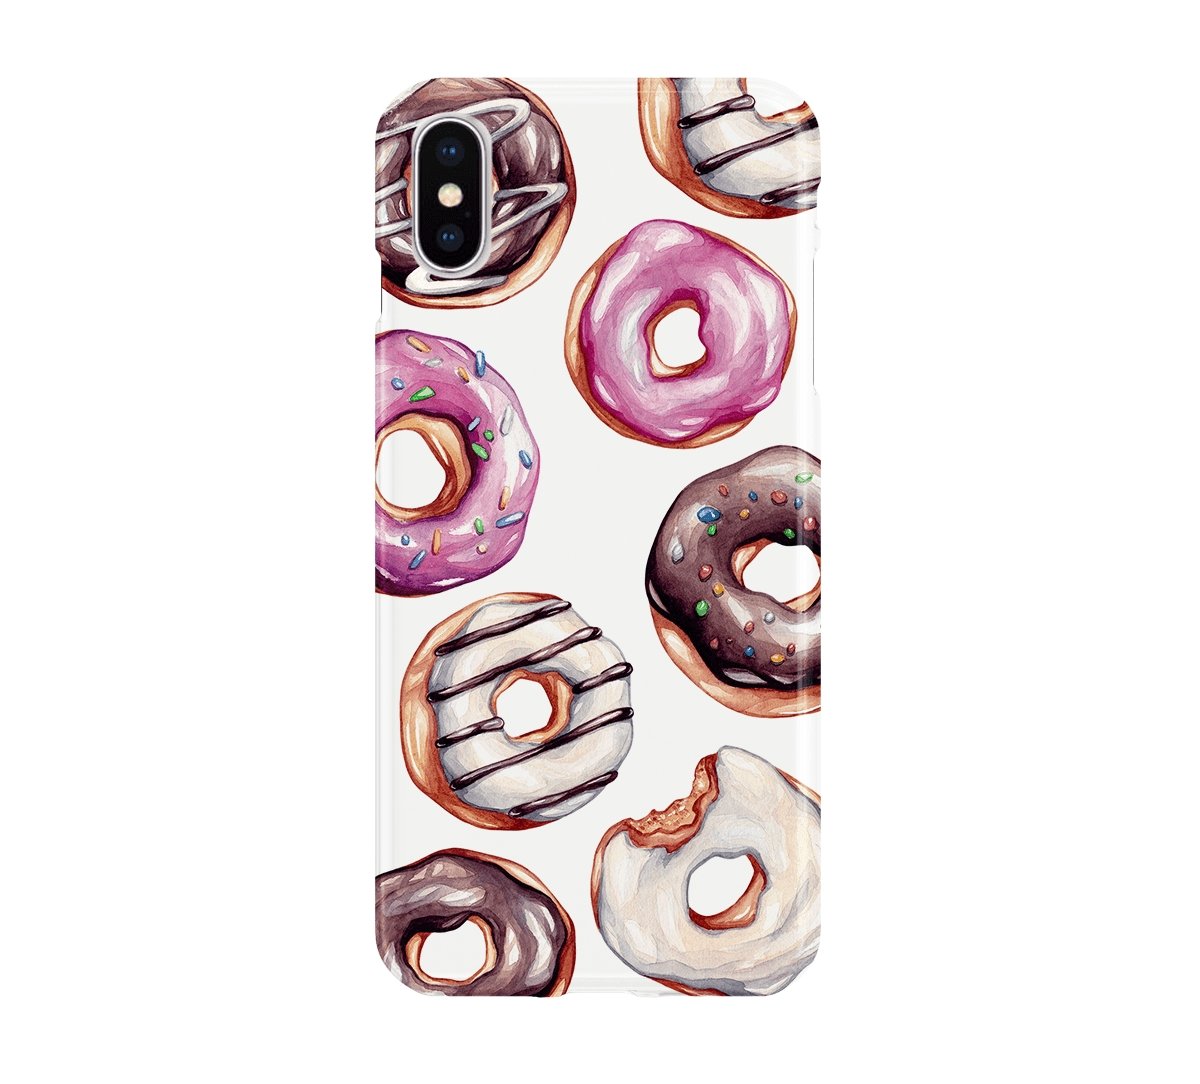 Donuts - iPhone phone case designs by CaseSwagger